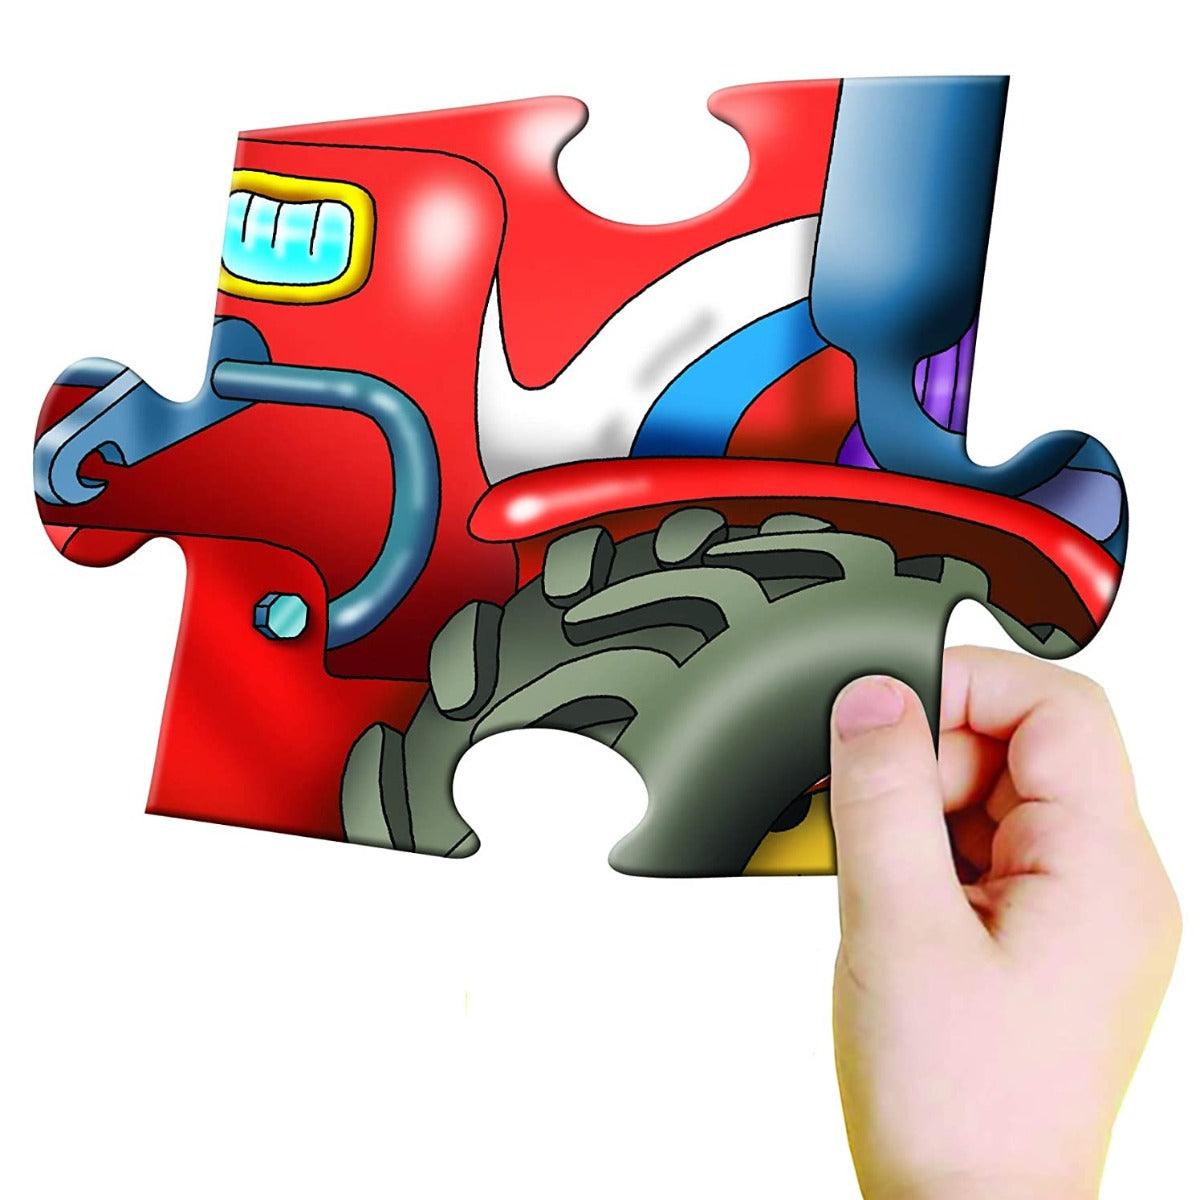 Frank Tractor Shaped Floor Puzzle - 15 Pieces